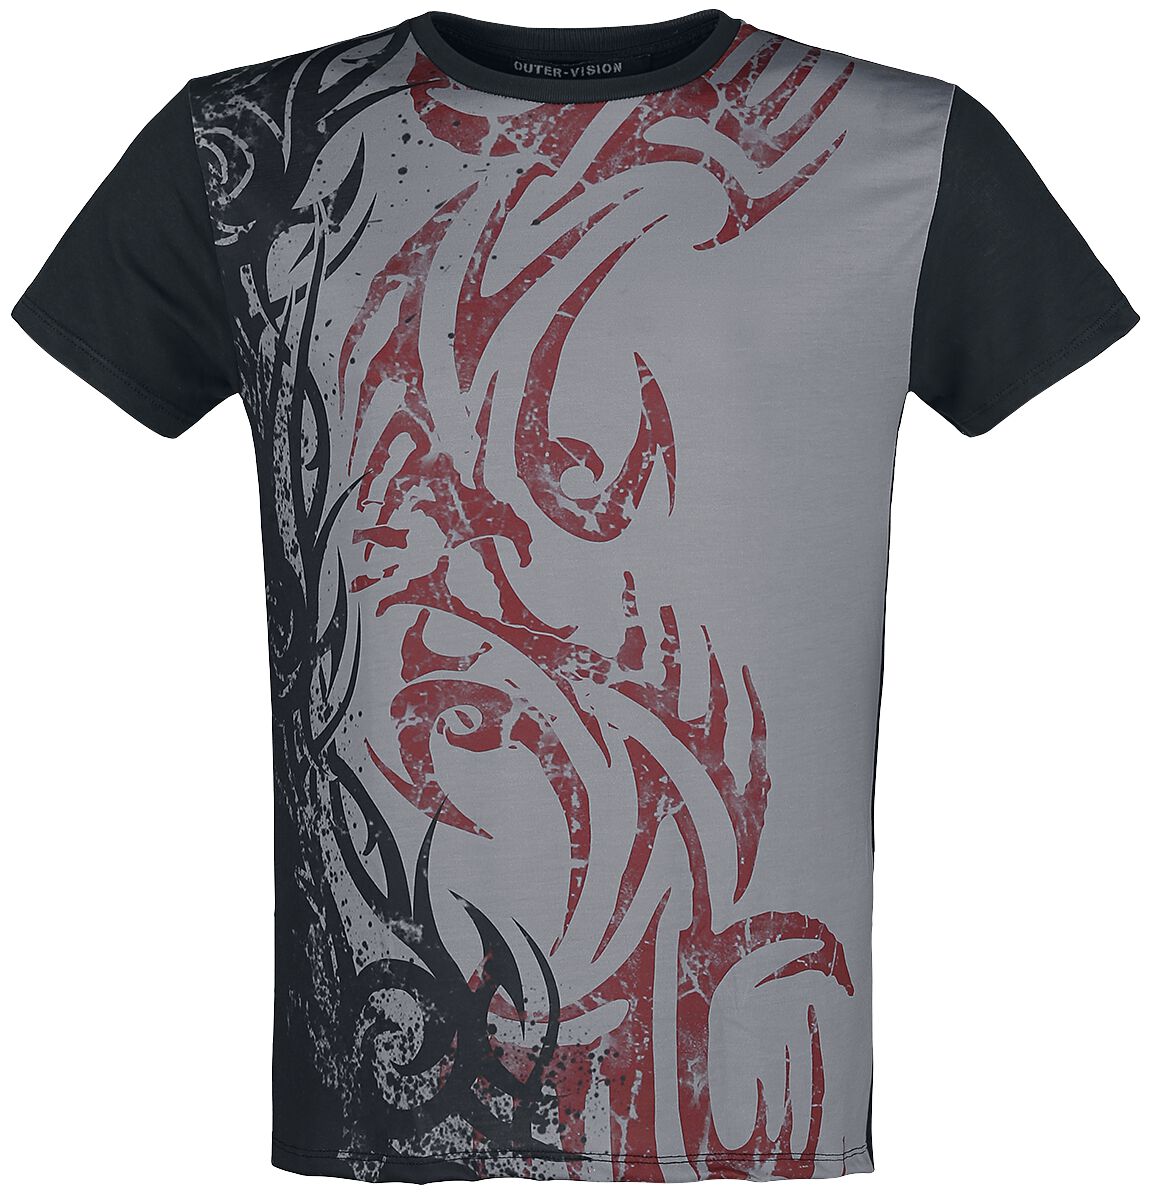 Image of Outer Vision Poisen Tattoo T-Shirt schwarz